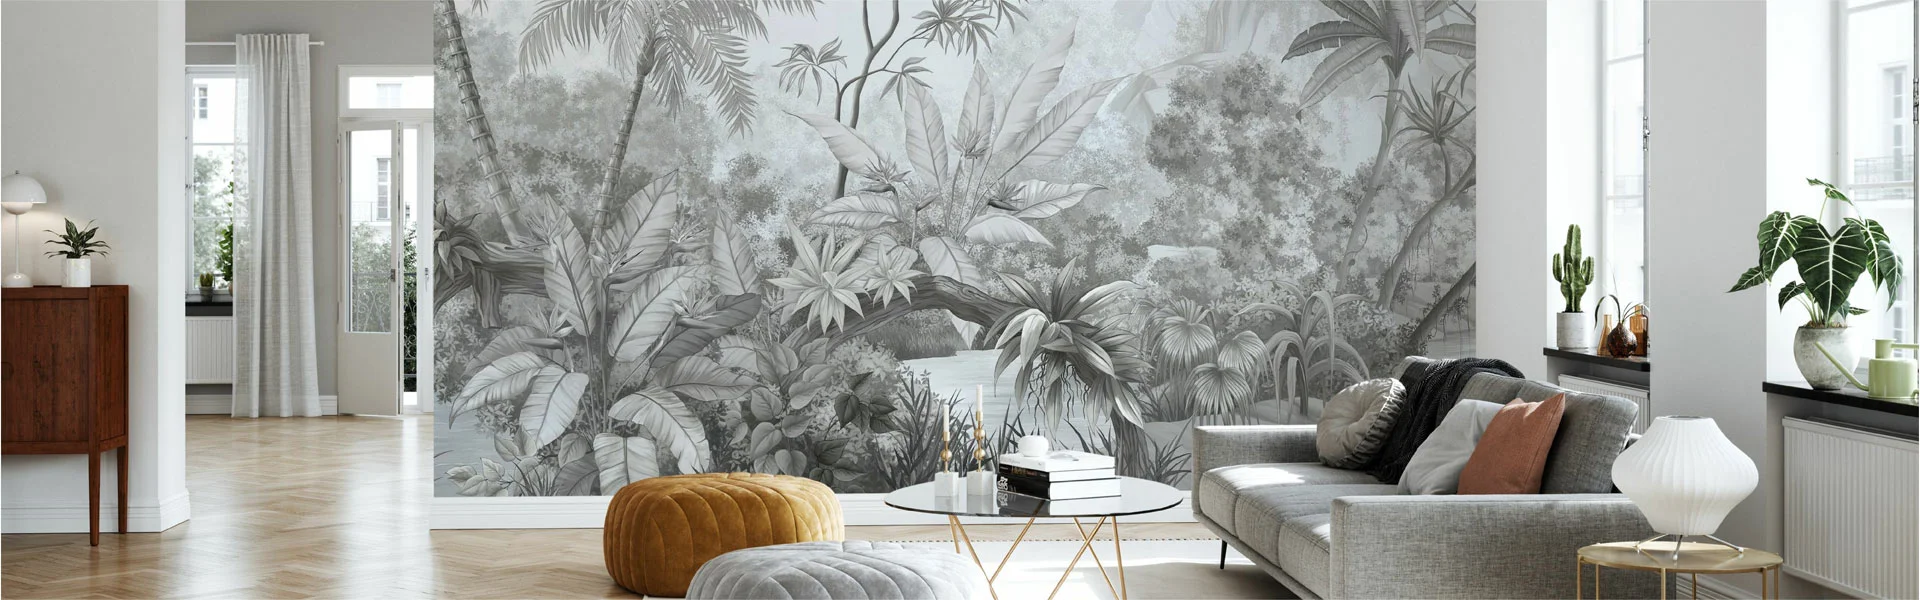 Subliamation Wall Covering Fabric For Sale